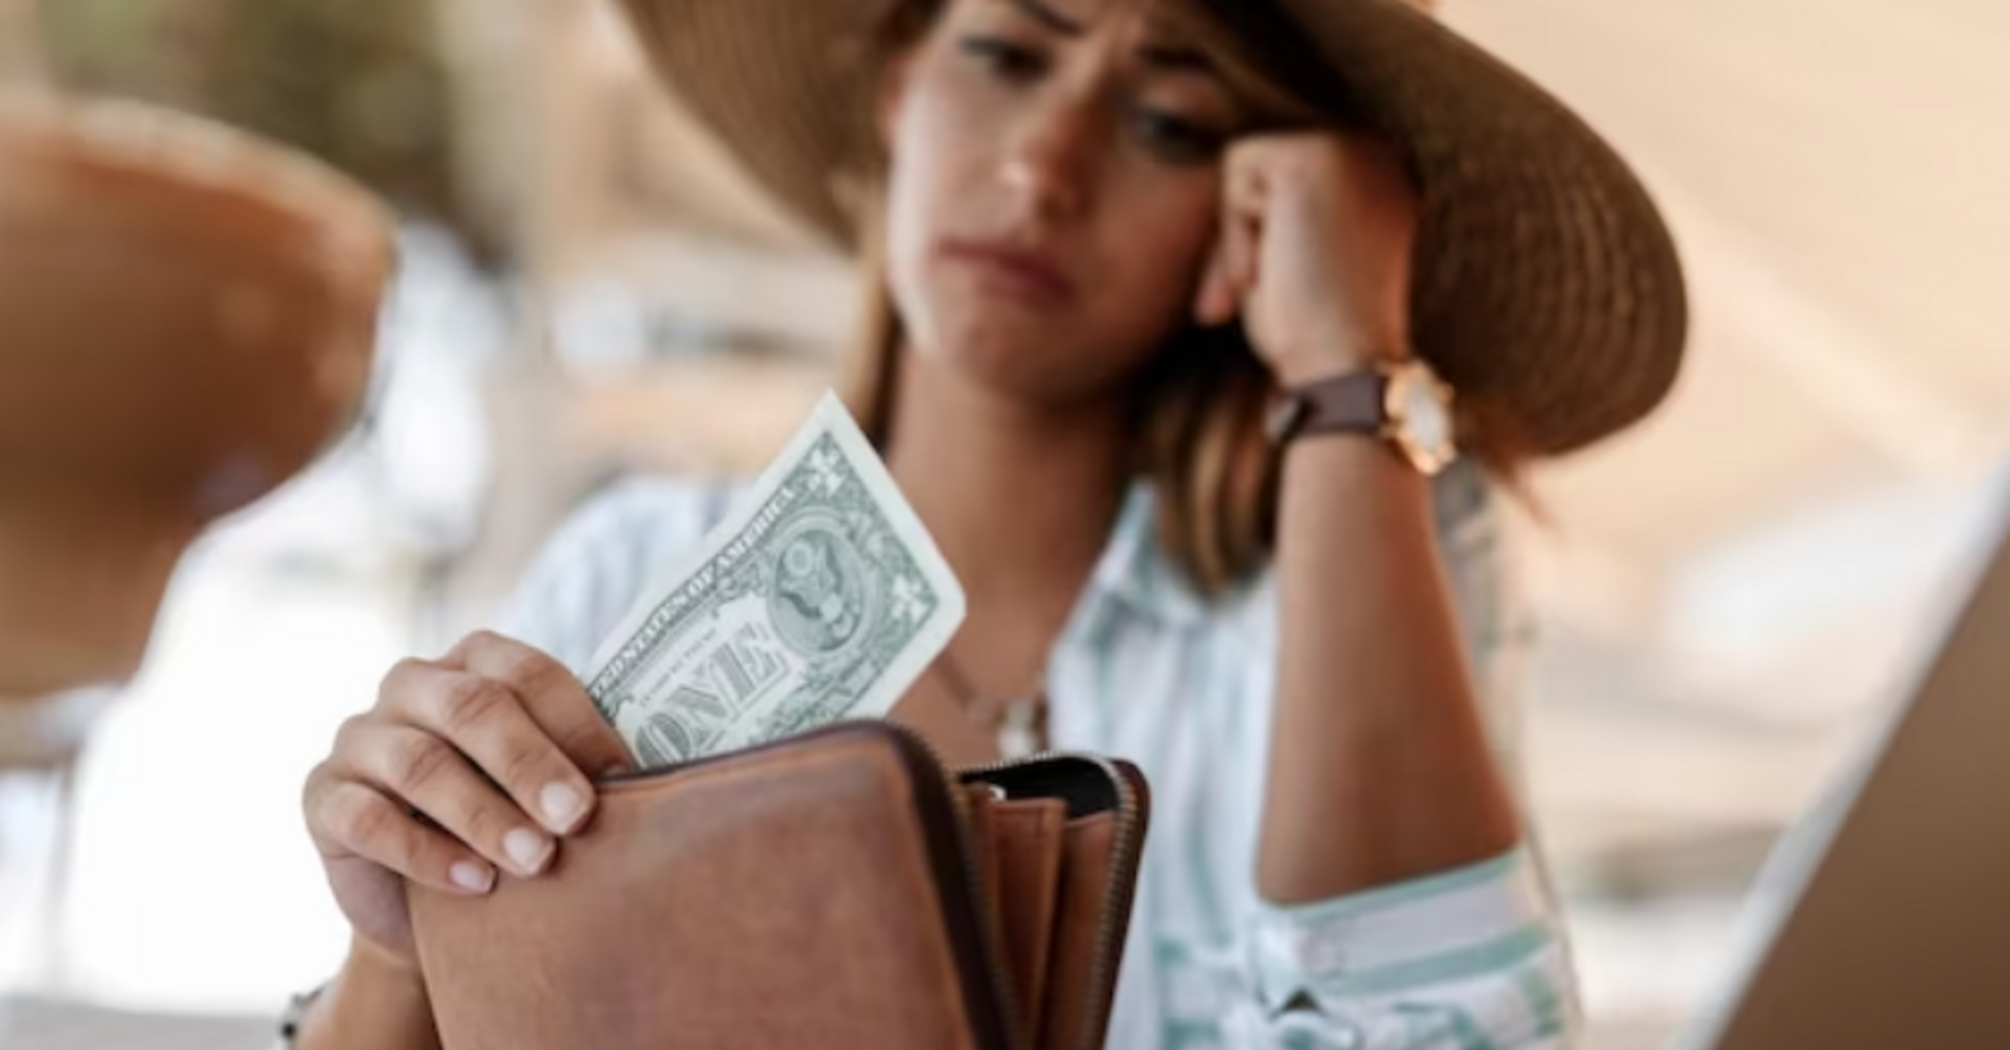 How not to spend more during your vacation